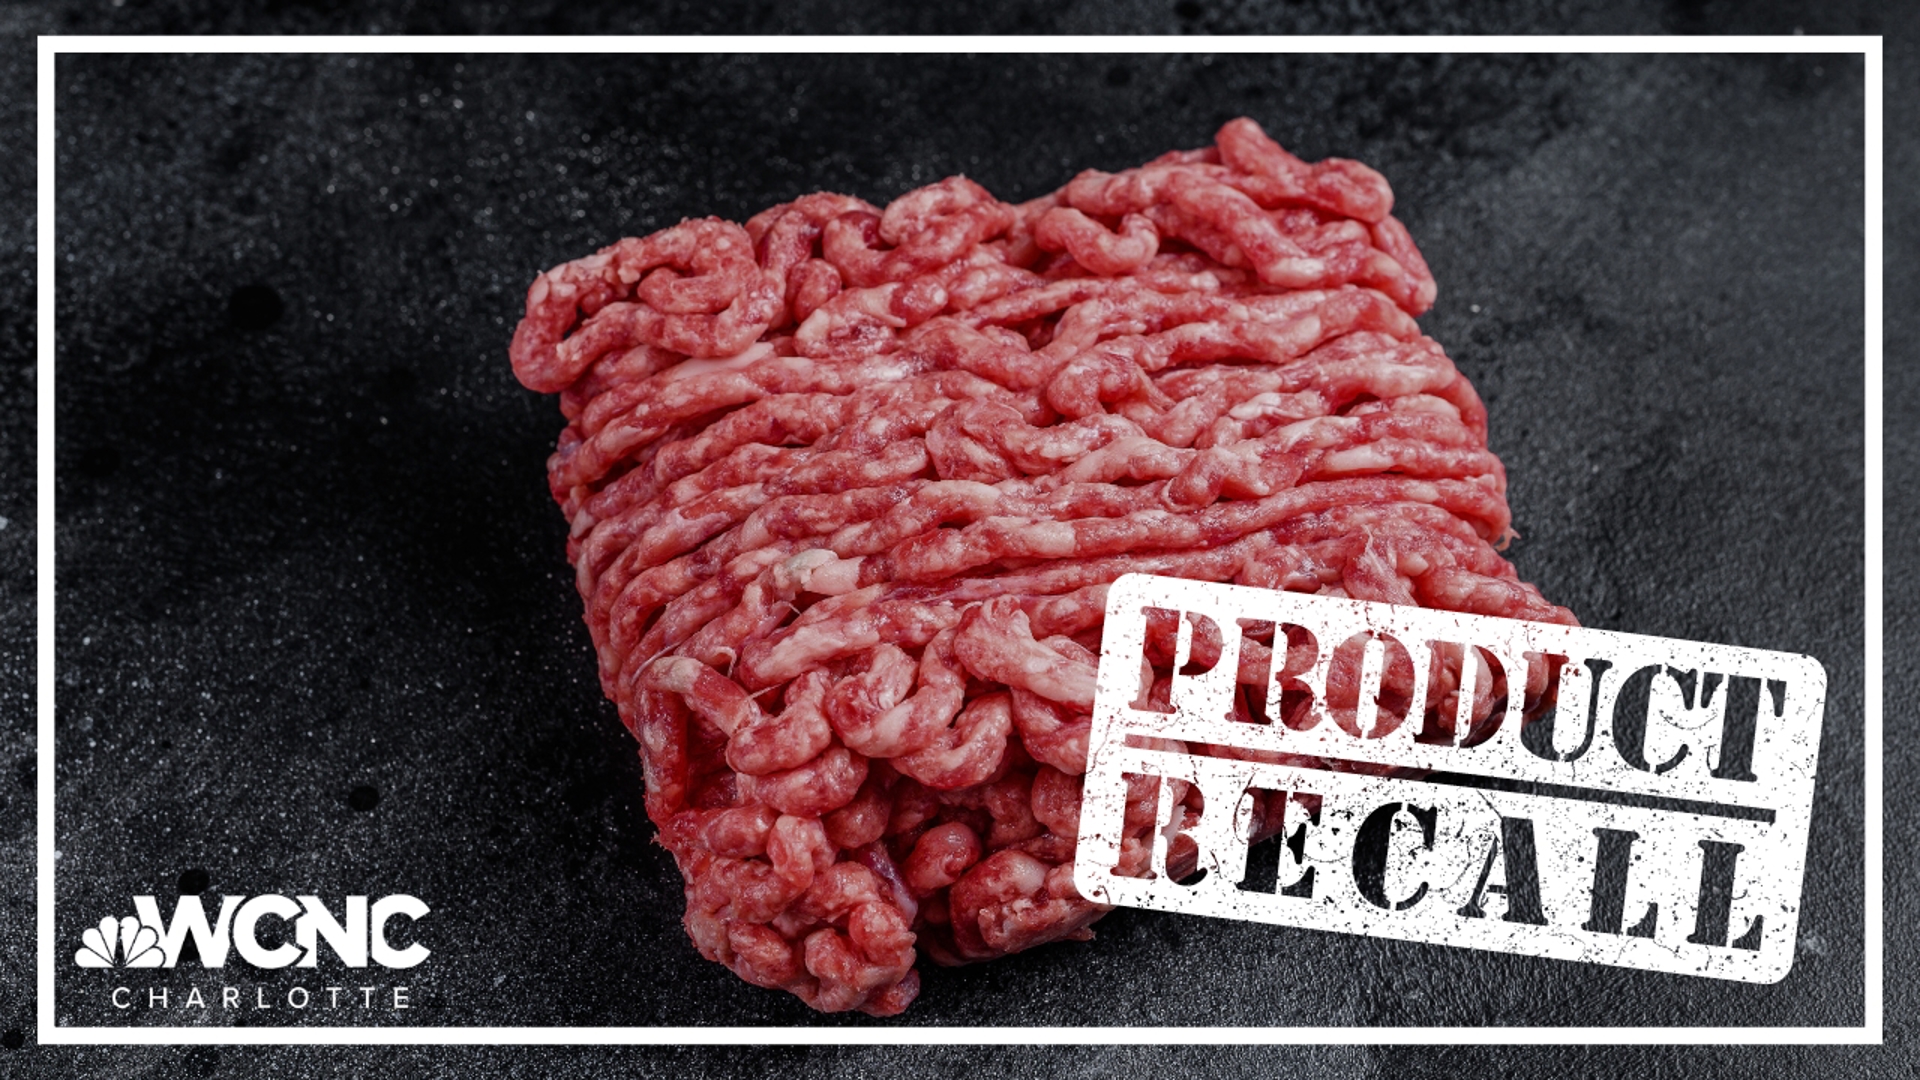 The retail giant is recalling 16,000 pounds of ground beef due to possible E. Coli contamination.